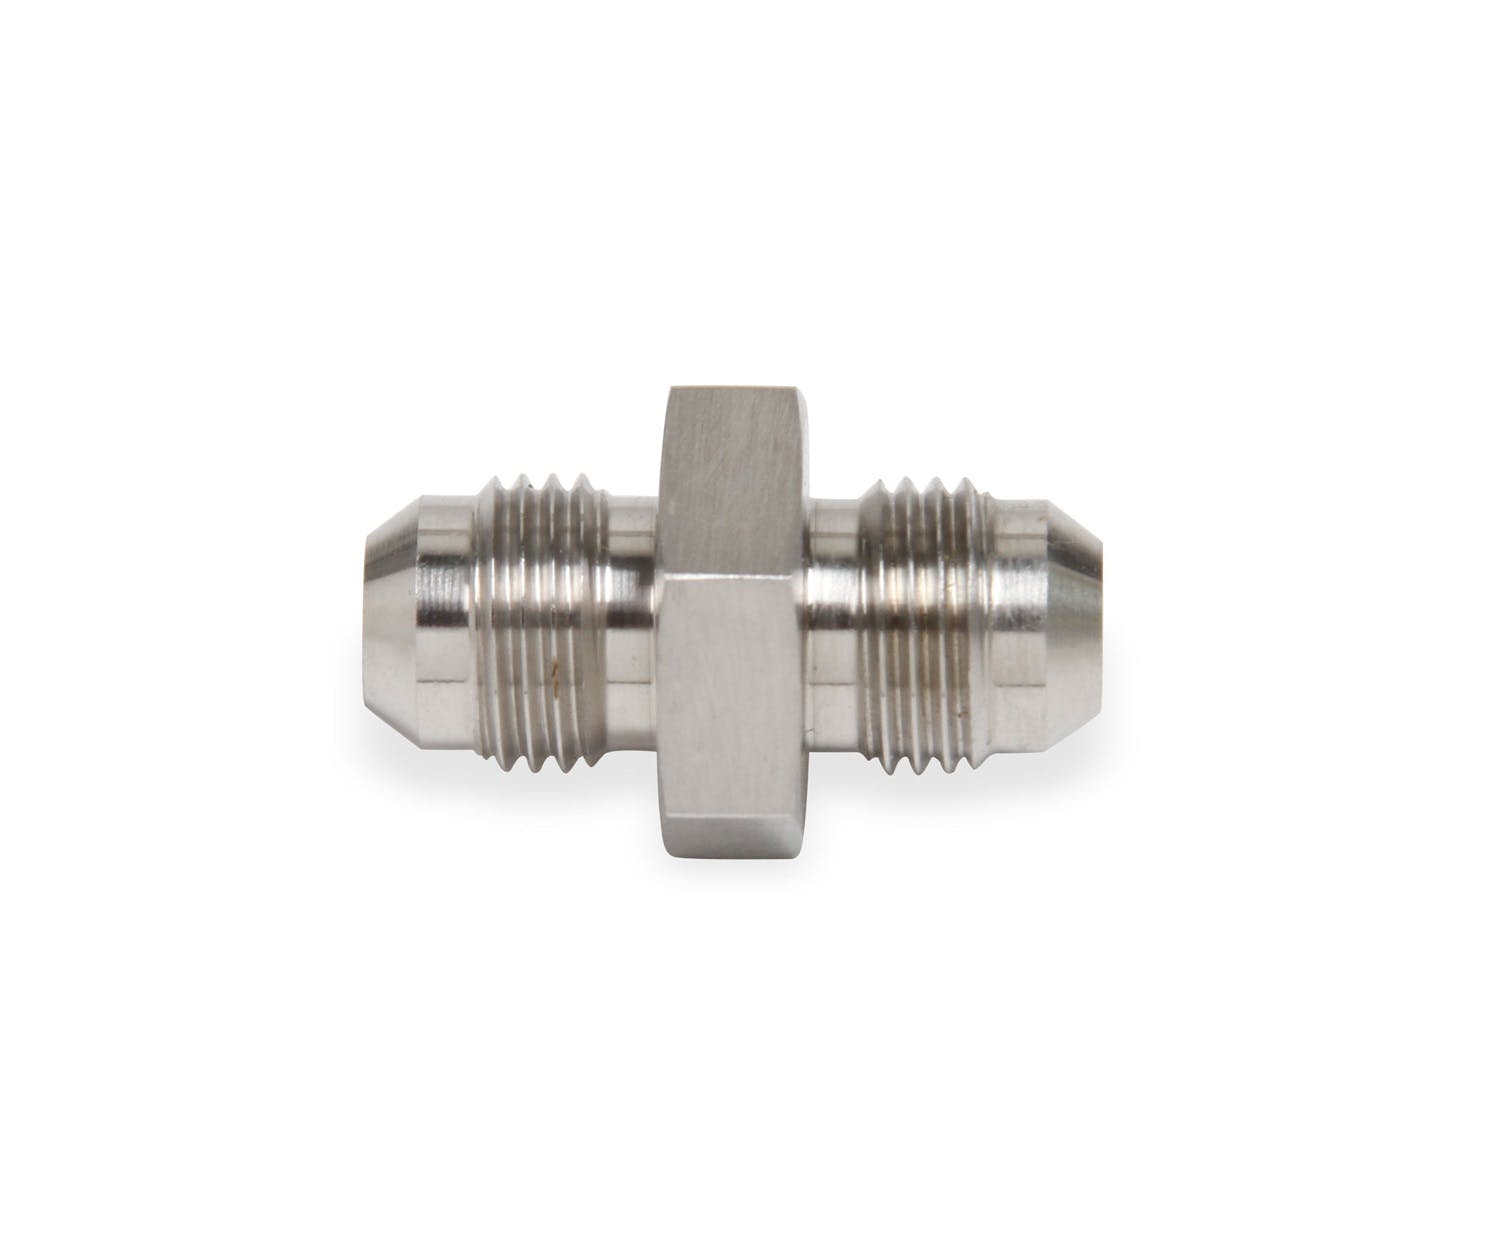 Earl's Performance Plumbing SS981504ERL -4 UNION STAINLESS STEEL